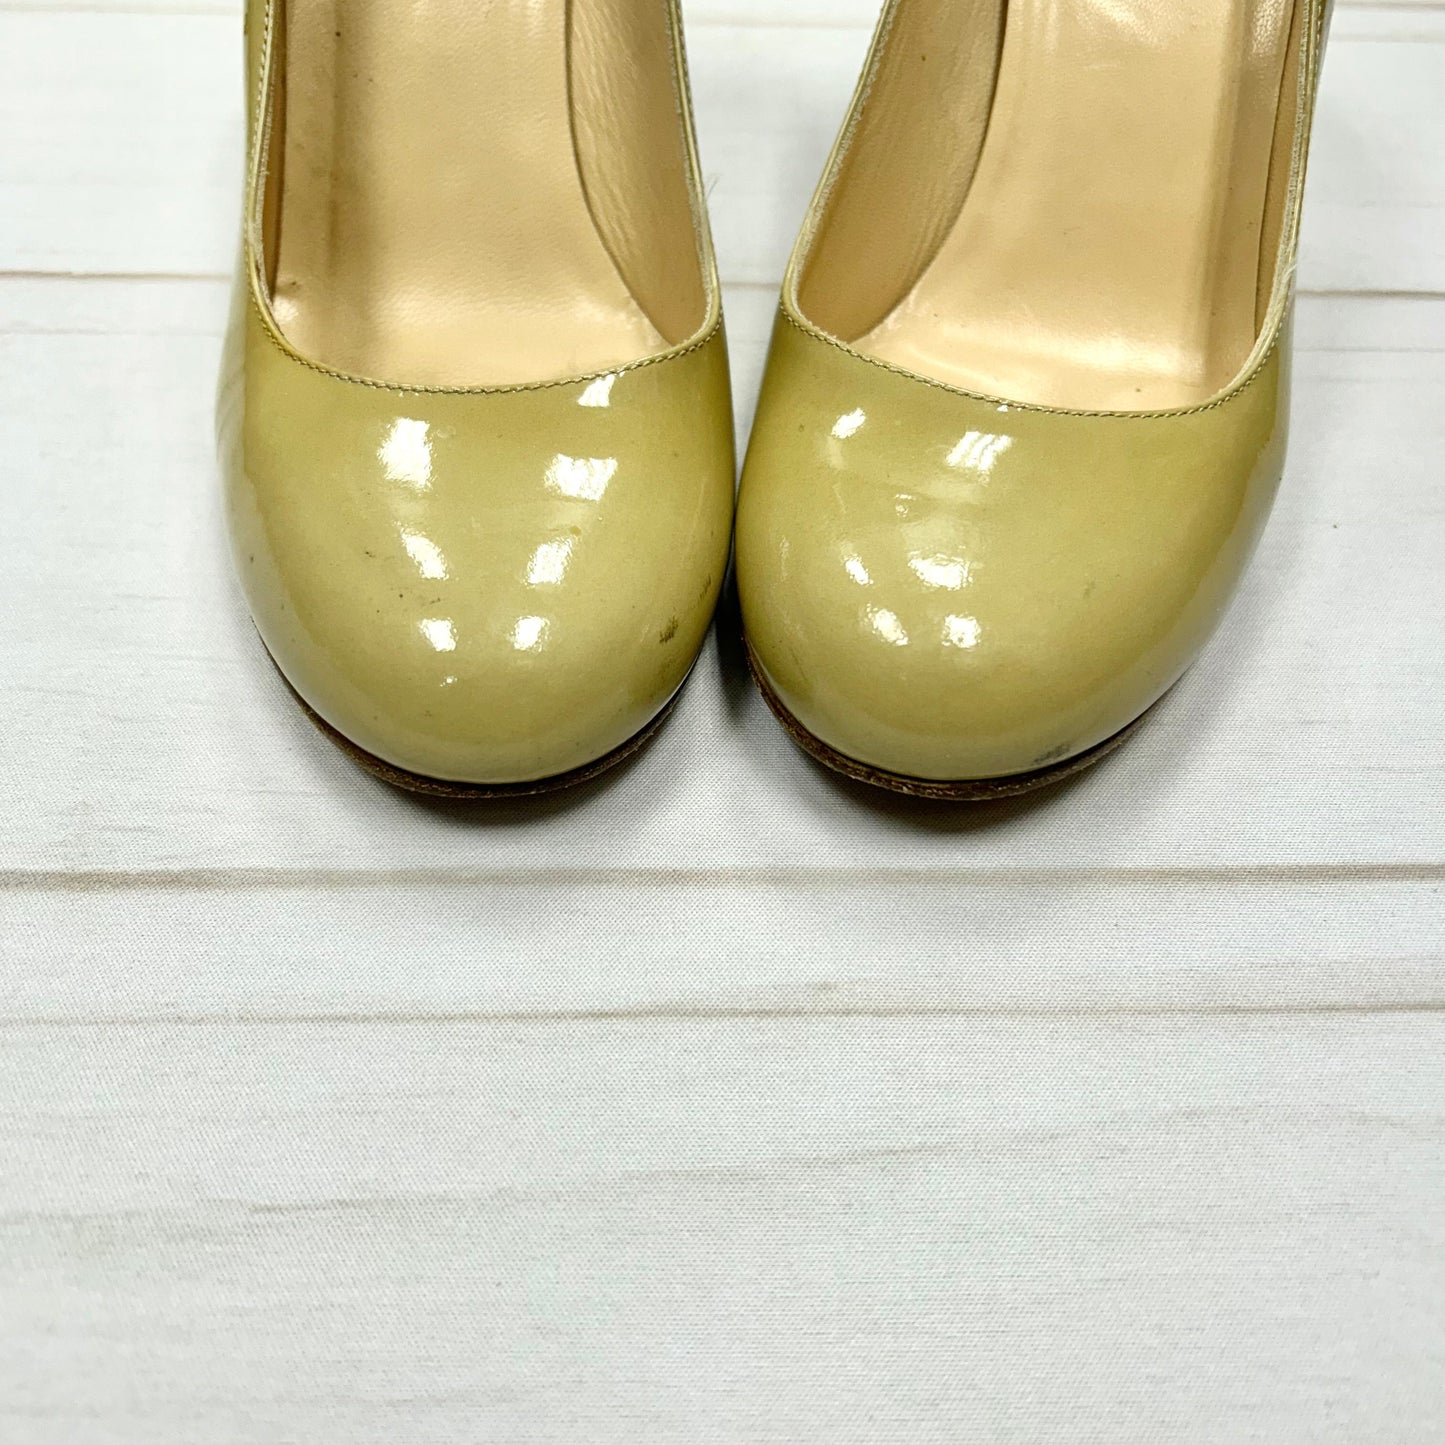 Shoes Designer By Kate Spade  Size: 7.5